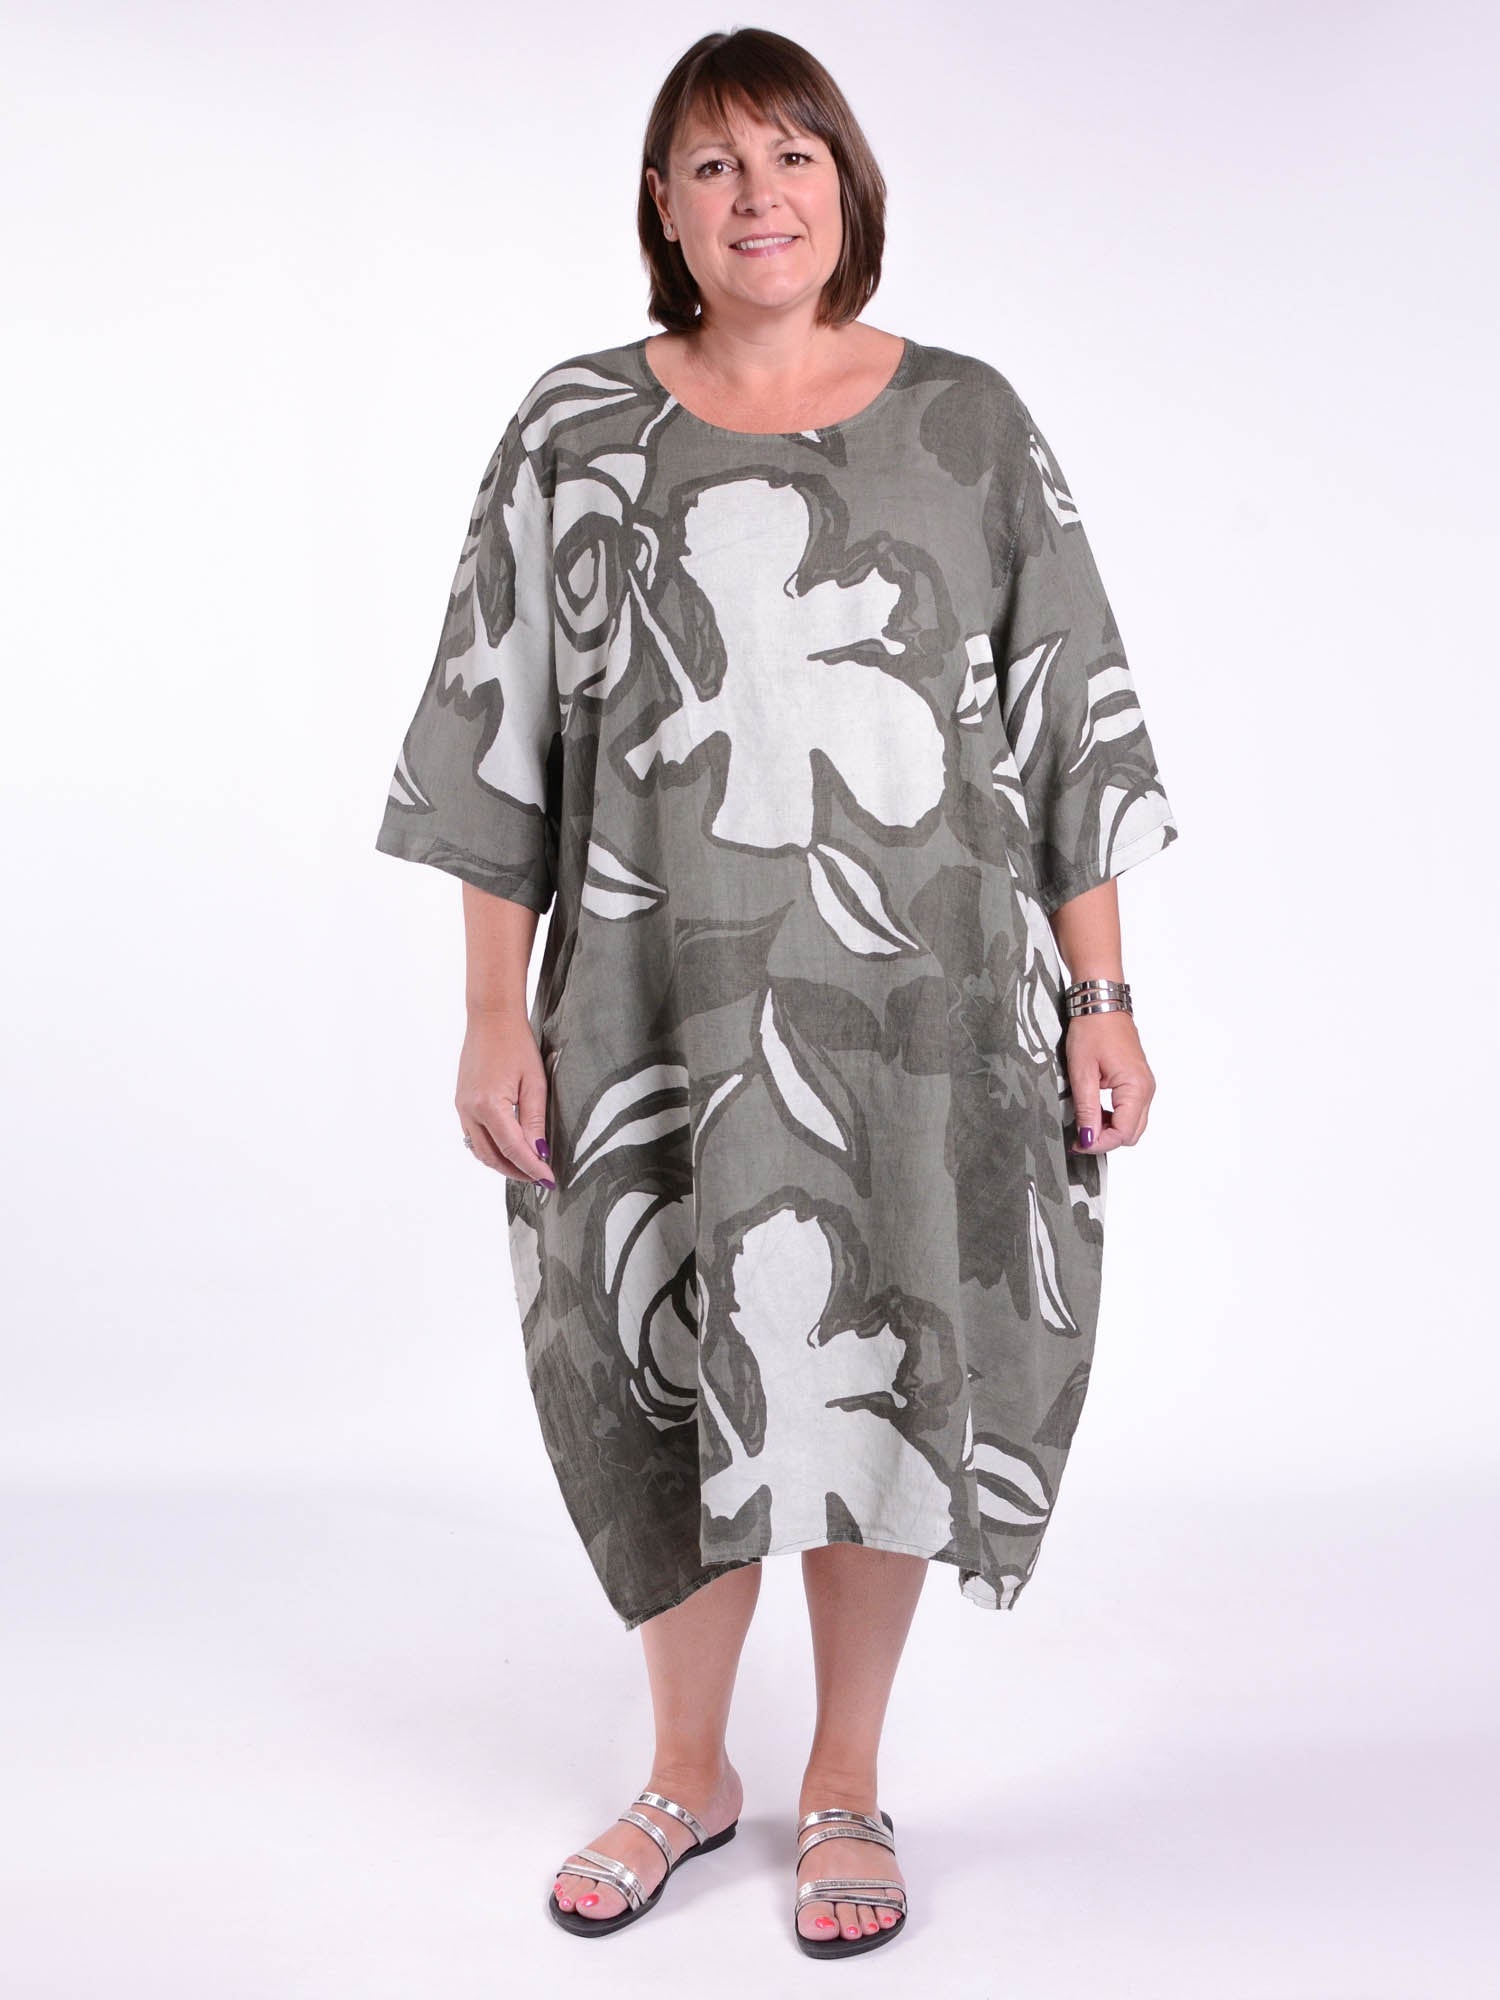 Lagenlook Casual Linen Tunic Dress - 9469 Floral, Dresses, Pure Plus Clothing, Lagenlook Clothing, Plus Size Fashion, Over 50 Fashion